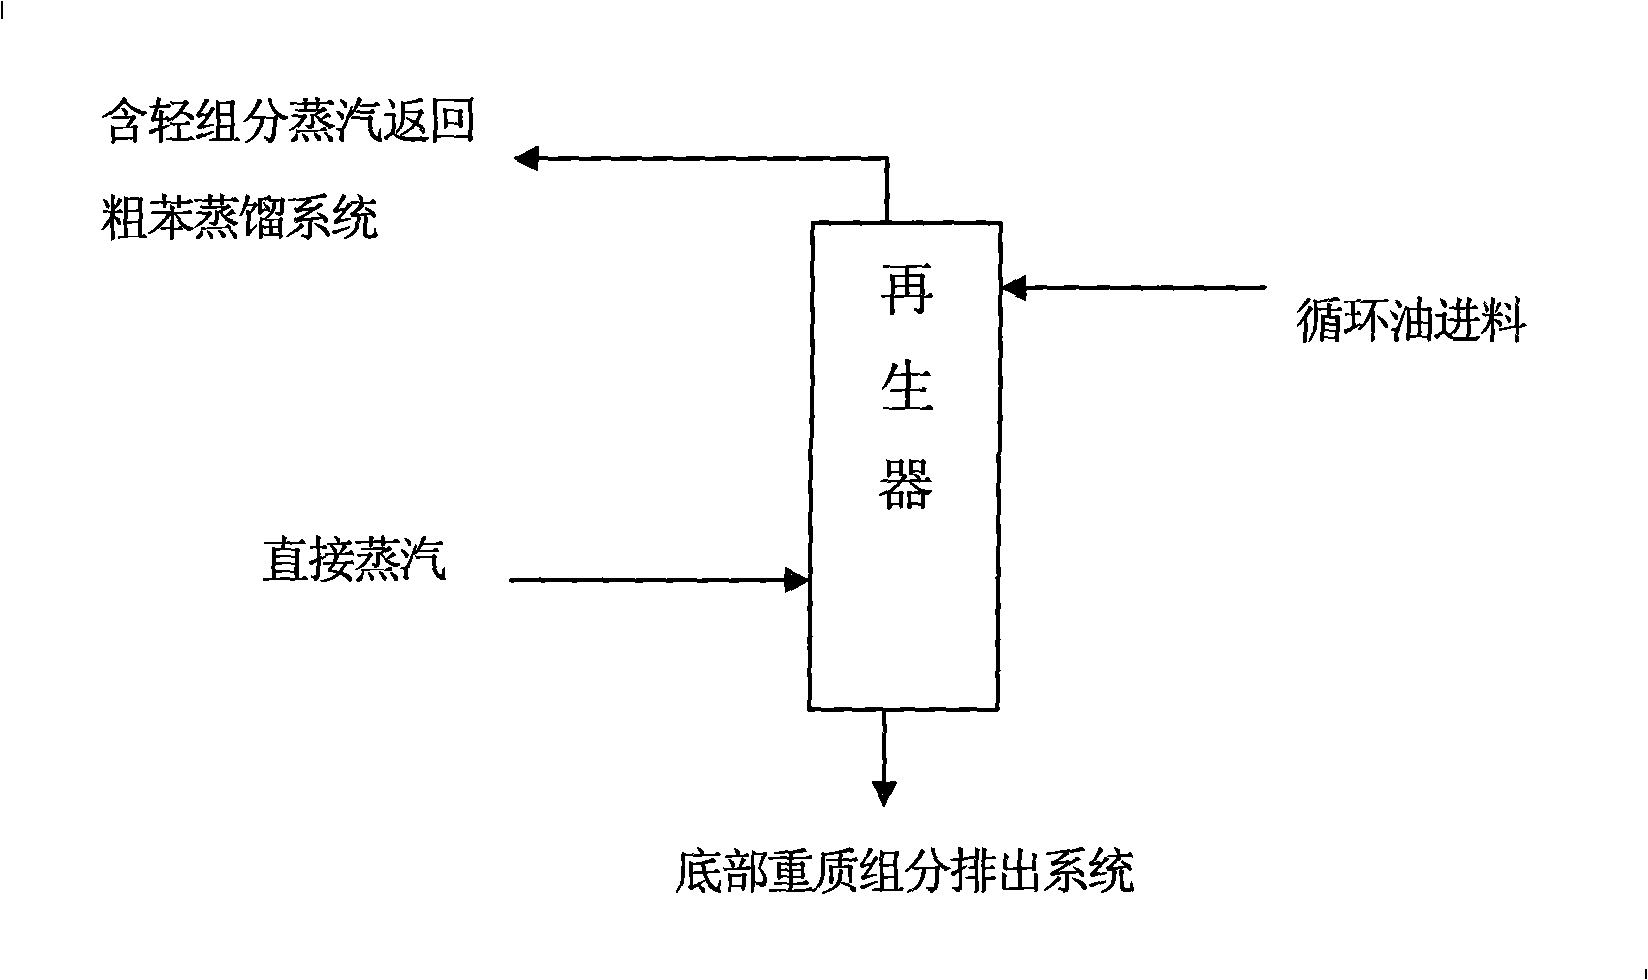 Novel regeneration process for circulation oil of crude benzol device